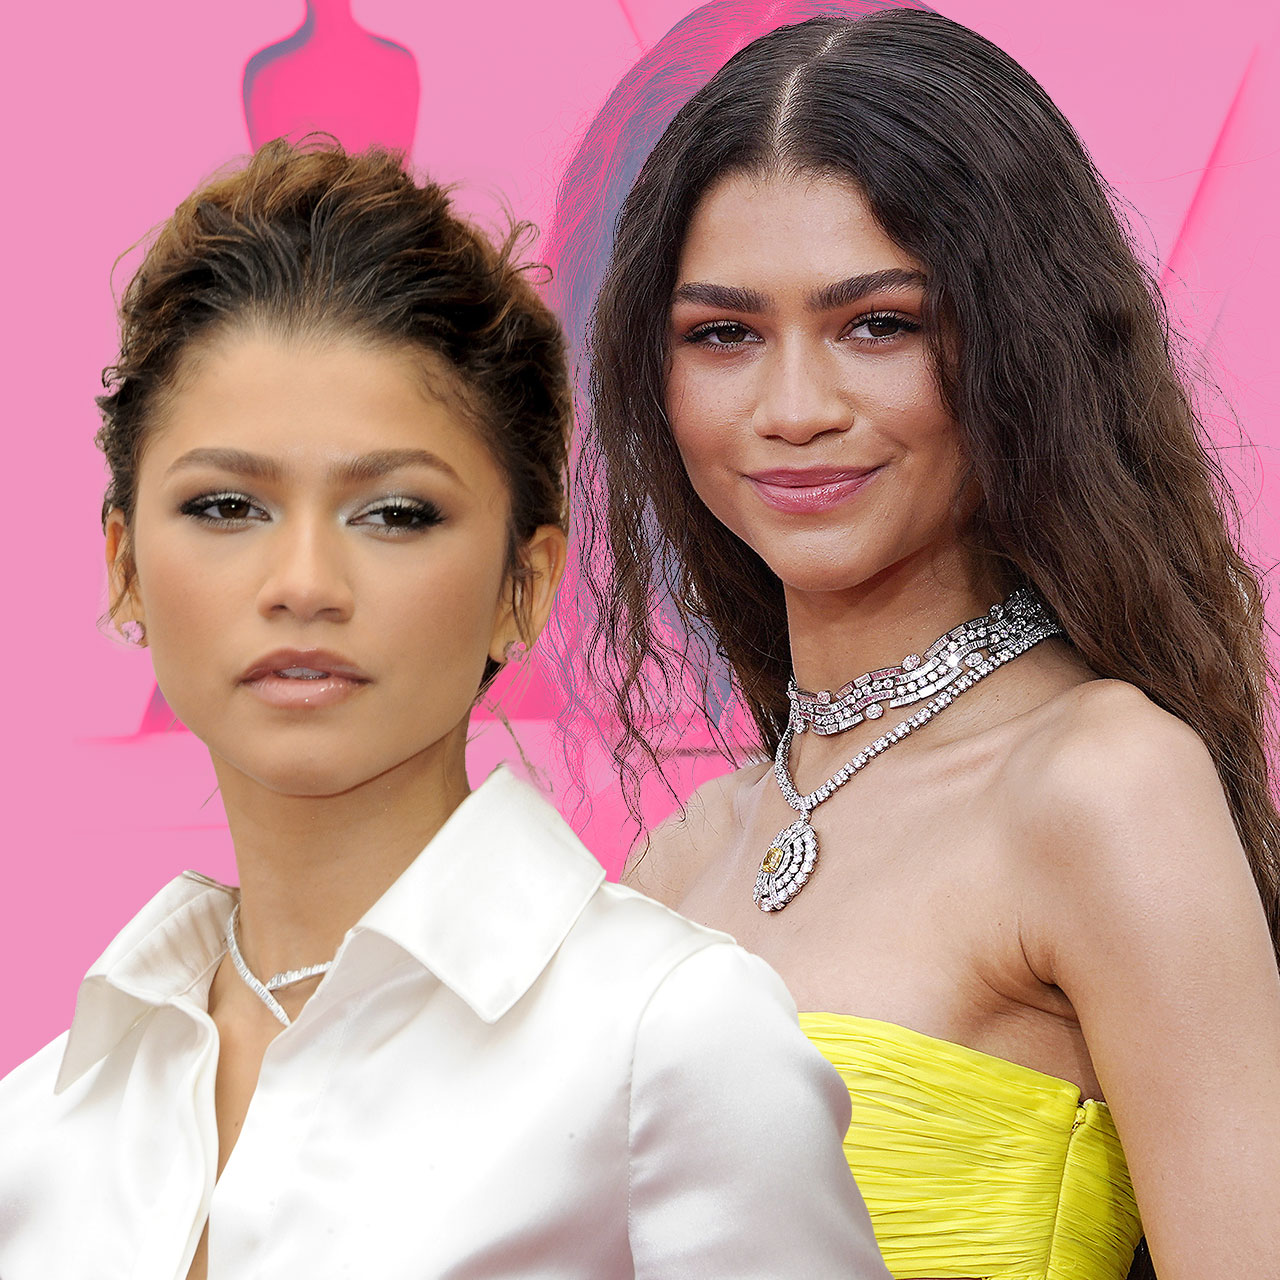 Zendaya Shows Off Toned Abs In Bandeau Bra Top & Low Rise Skirt